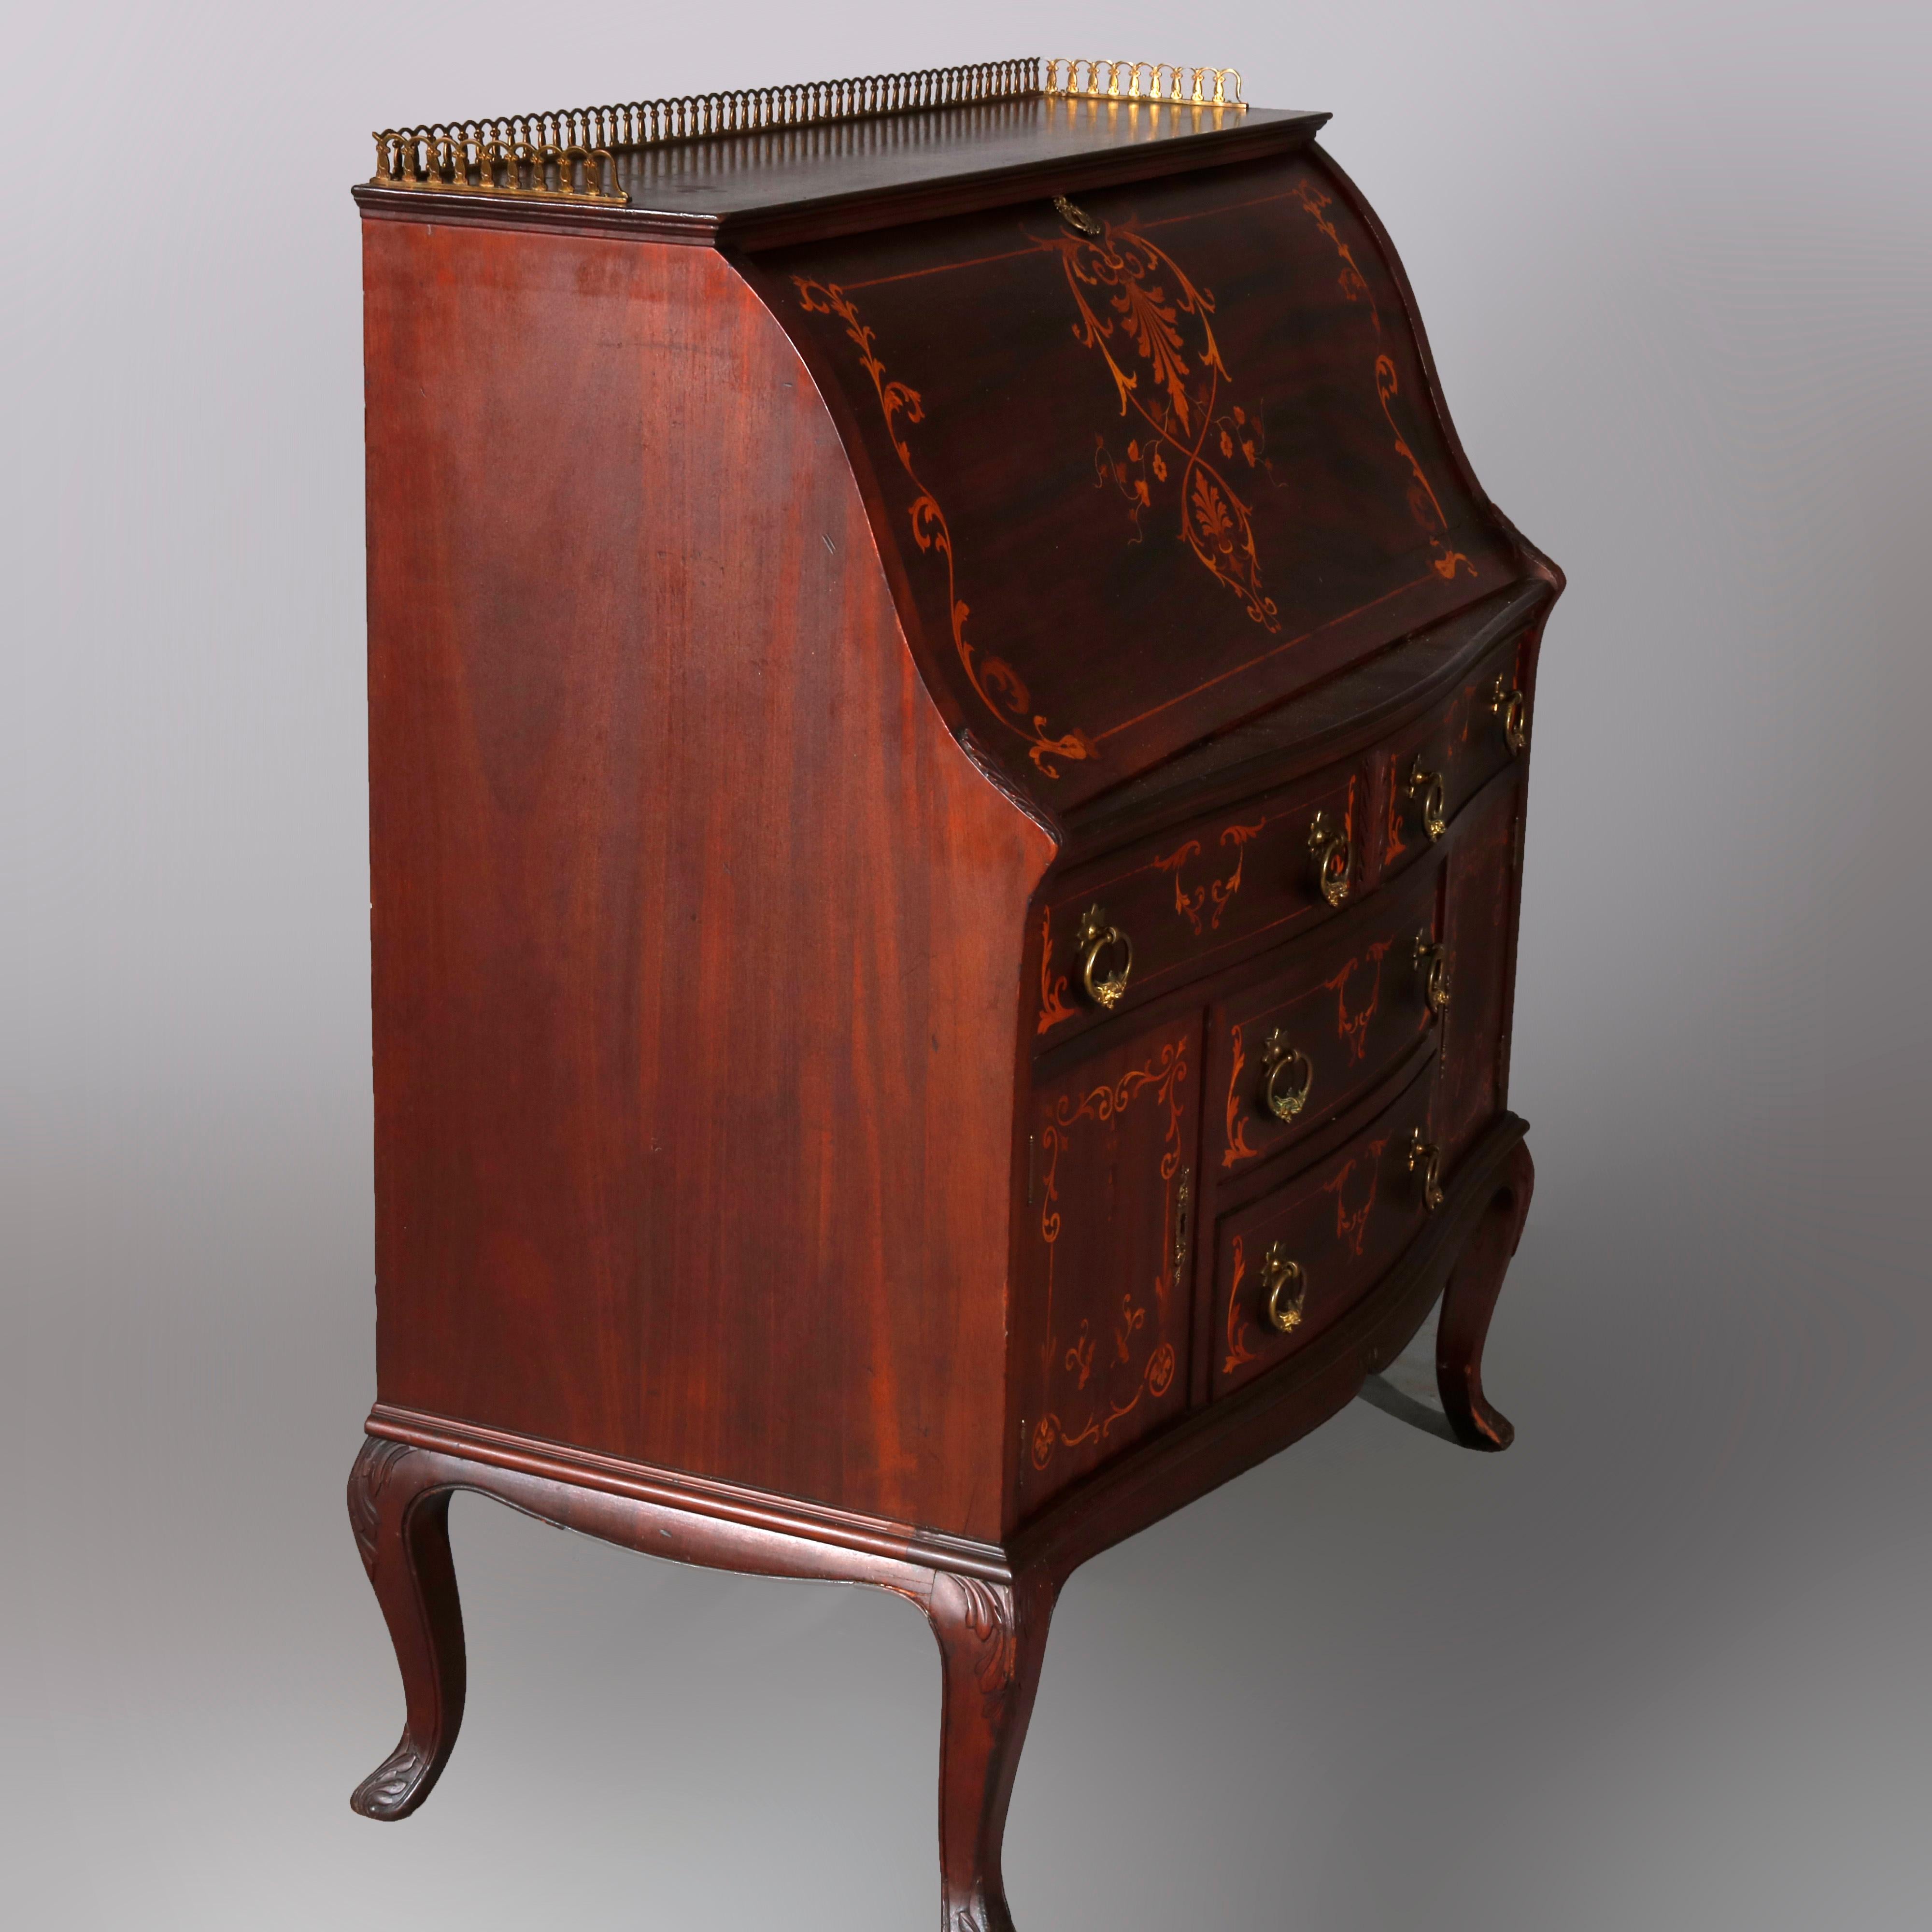 20th Century French RJ Horner Style Mahogany and Satinwood Inlaid Drop Front Desk, circa 1900